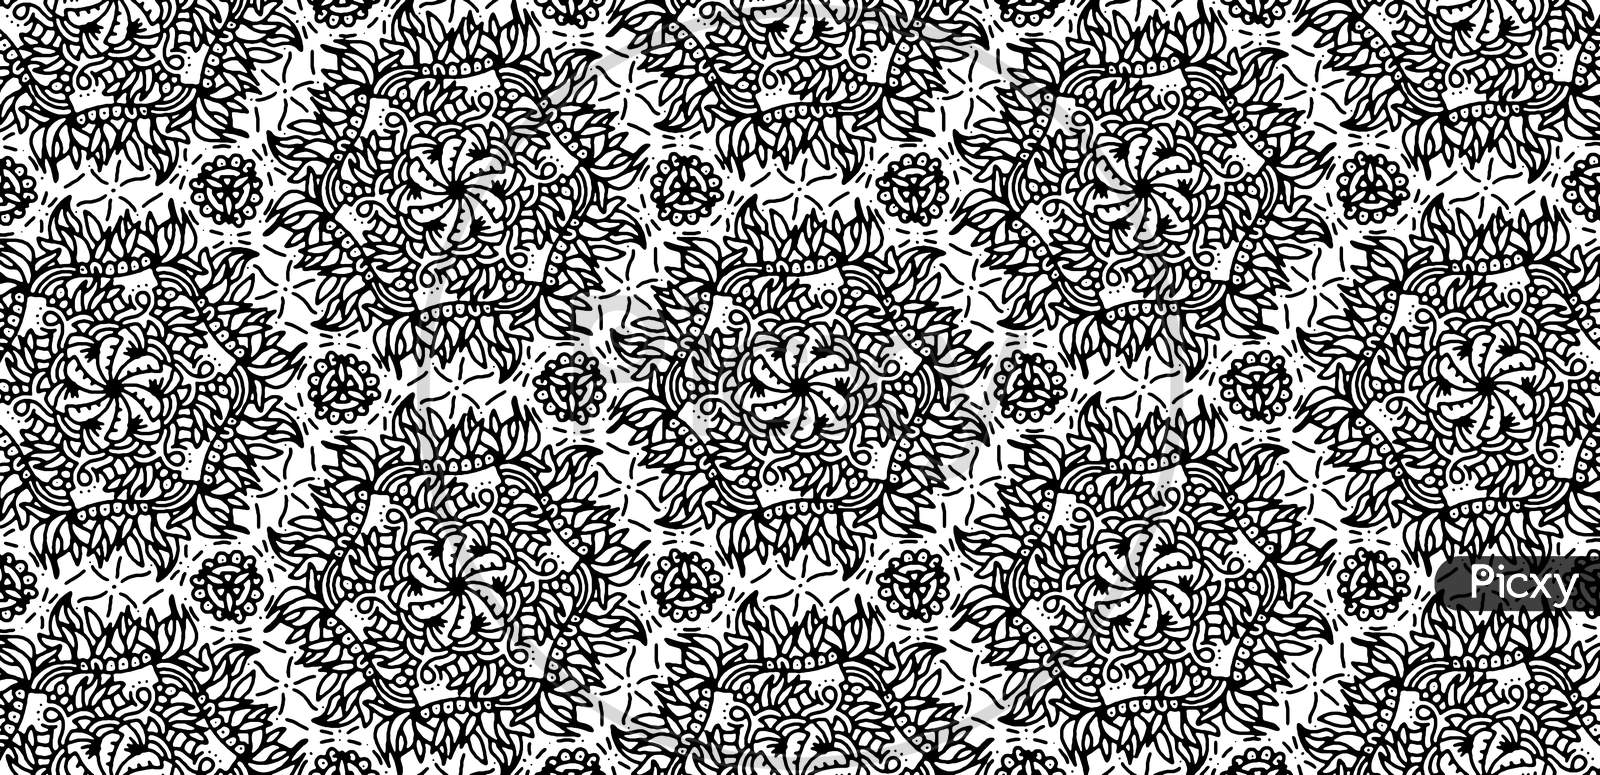 Beautiful Illustration Of Monochromatic Symmetrical Patterns And Designs. Concept Of Home Decor And Interior Designing